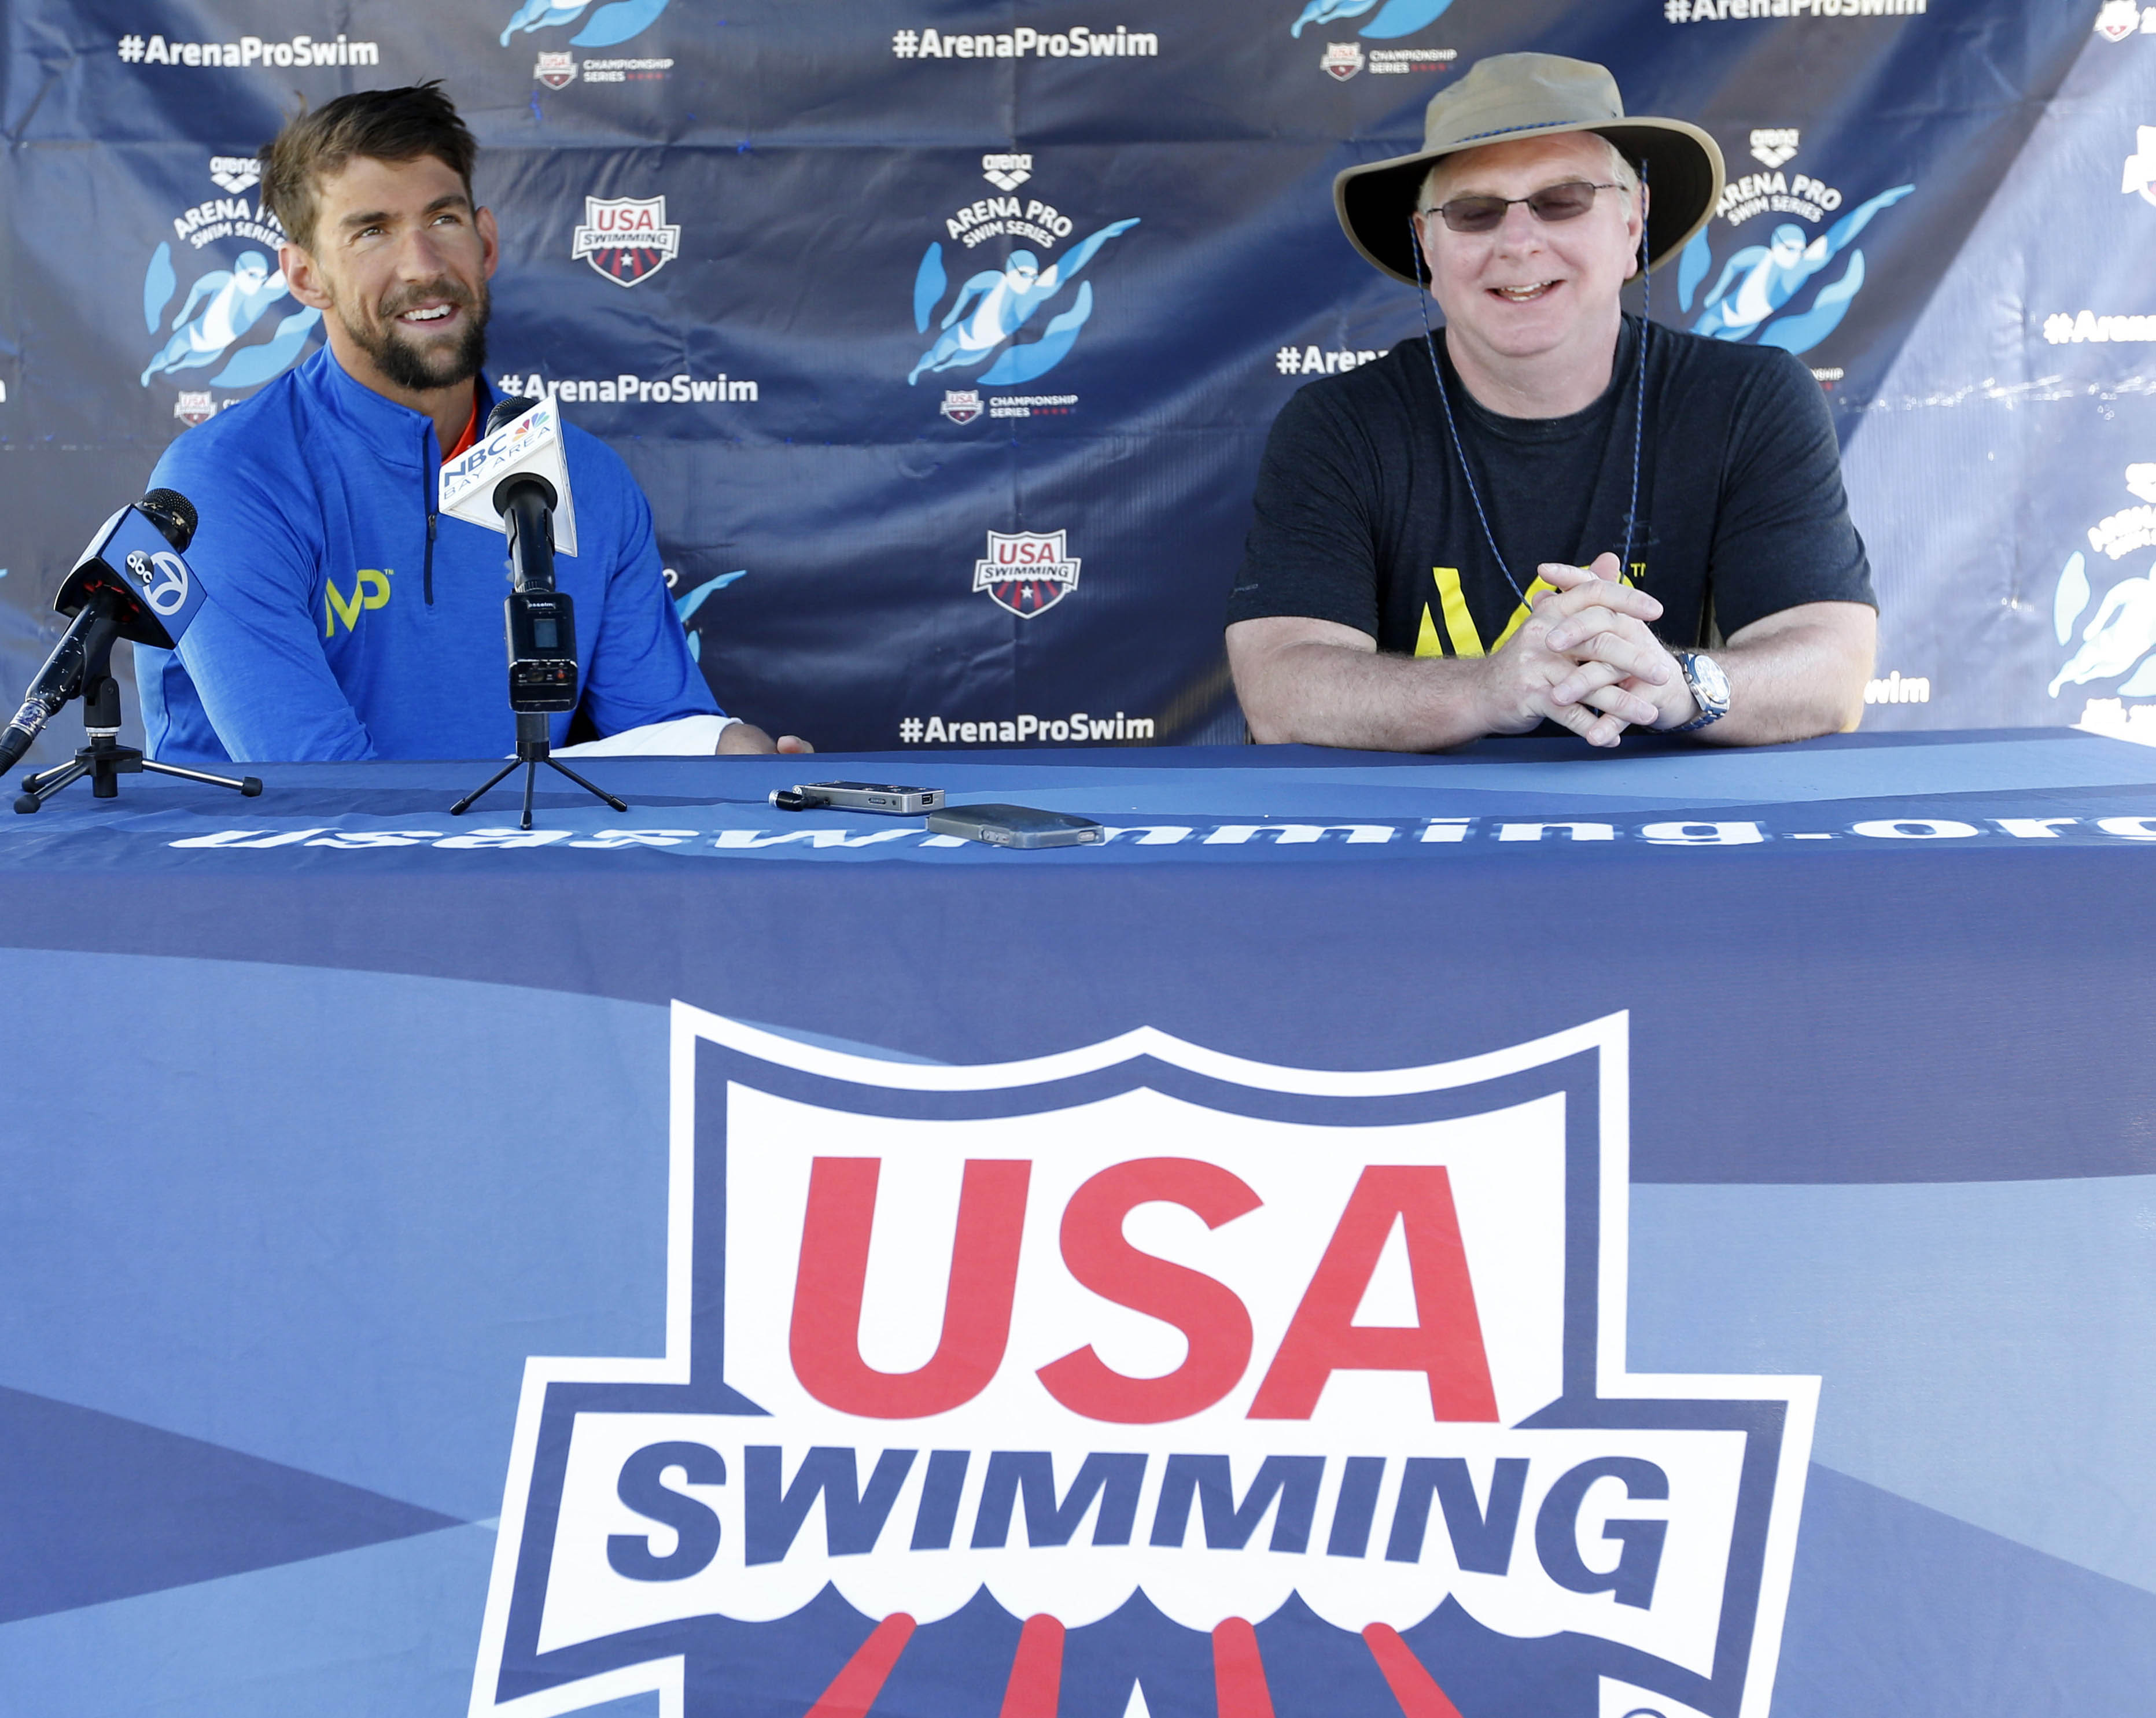 Jun 18, 2015; Santa Clara, CA, USA; Michael Phelps (USA) on left, and Bob Bowman head swimming coach of the Arizona State Sun Devils, answer questions during the morning press conference on day one of the Arena Pro Series at Santa Clara, at the George F. Haines International Swim Center in Santa Clara, Calif. Mandatory Credit: Bob Stanton-USA TODAY Sports